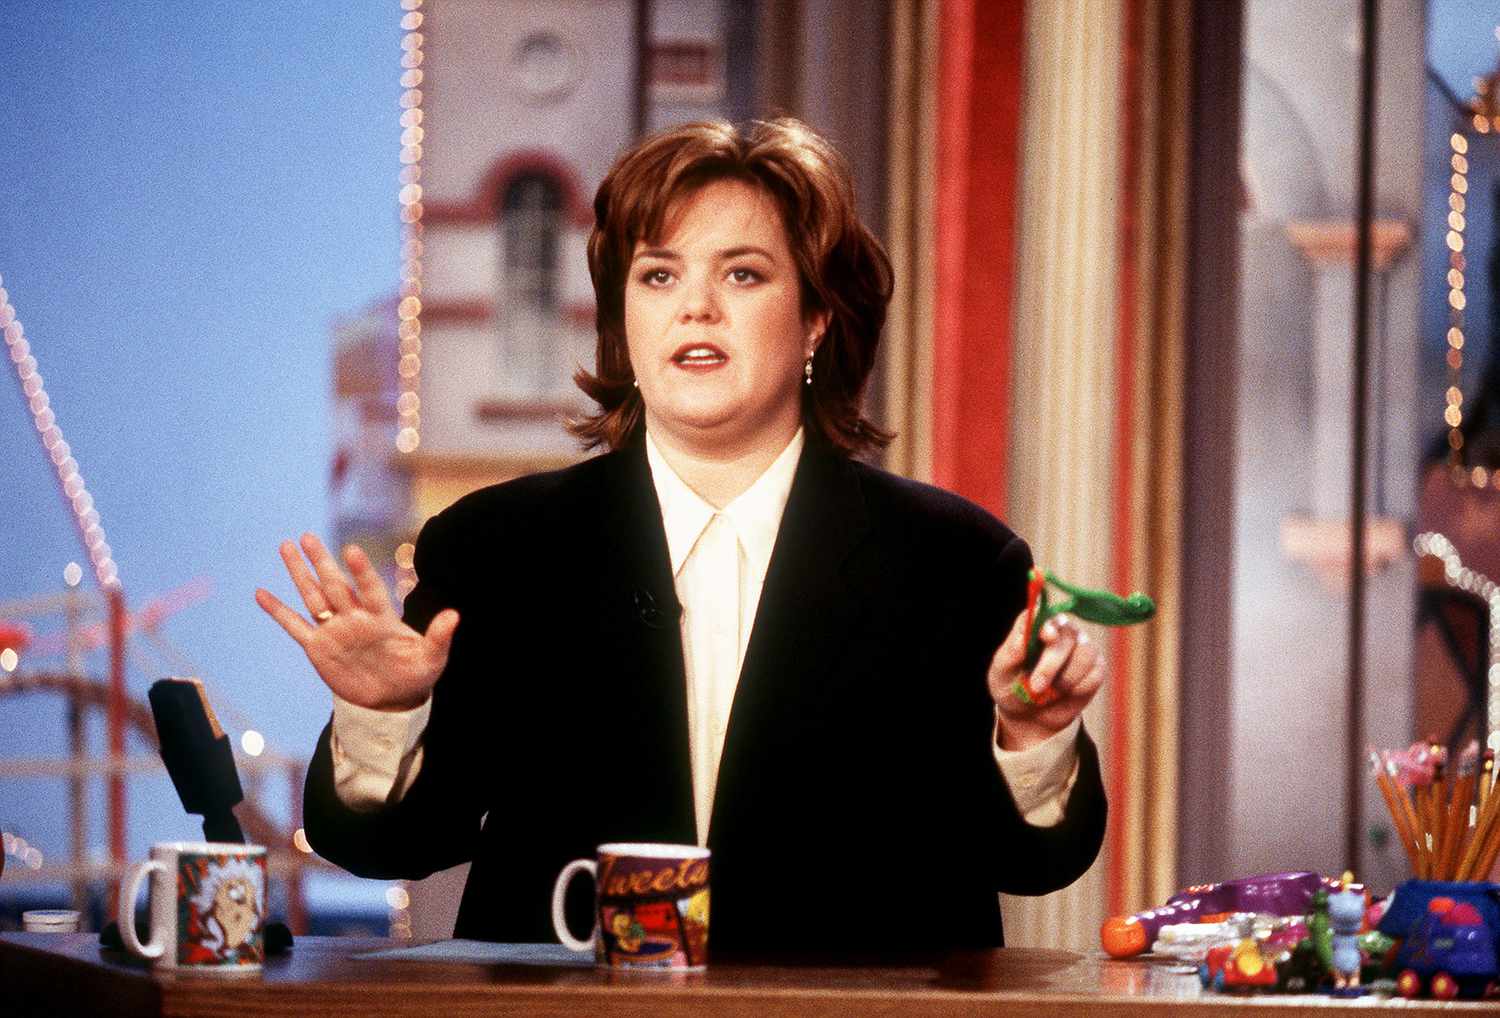 2002: Rosie O'Donnell Slips Out of the Closet